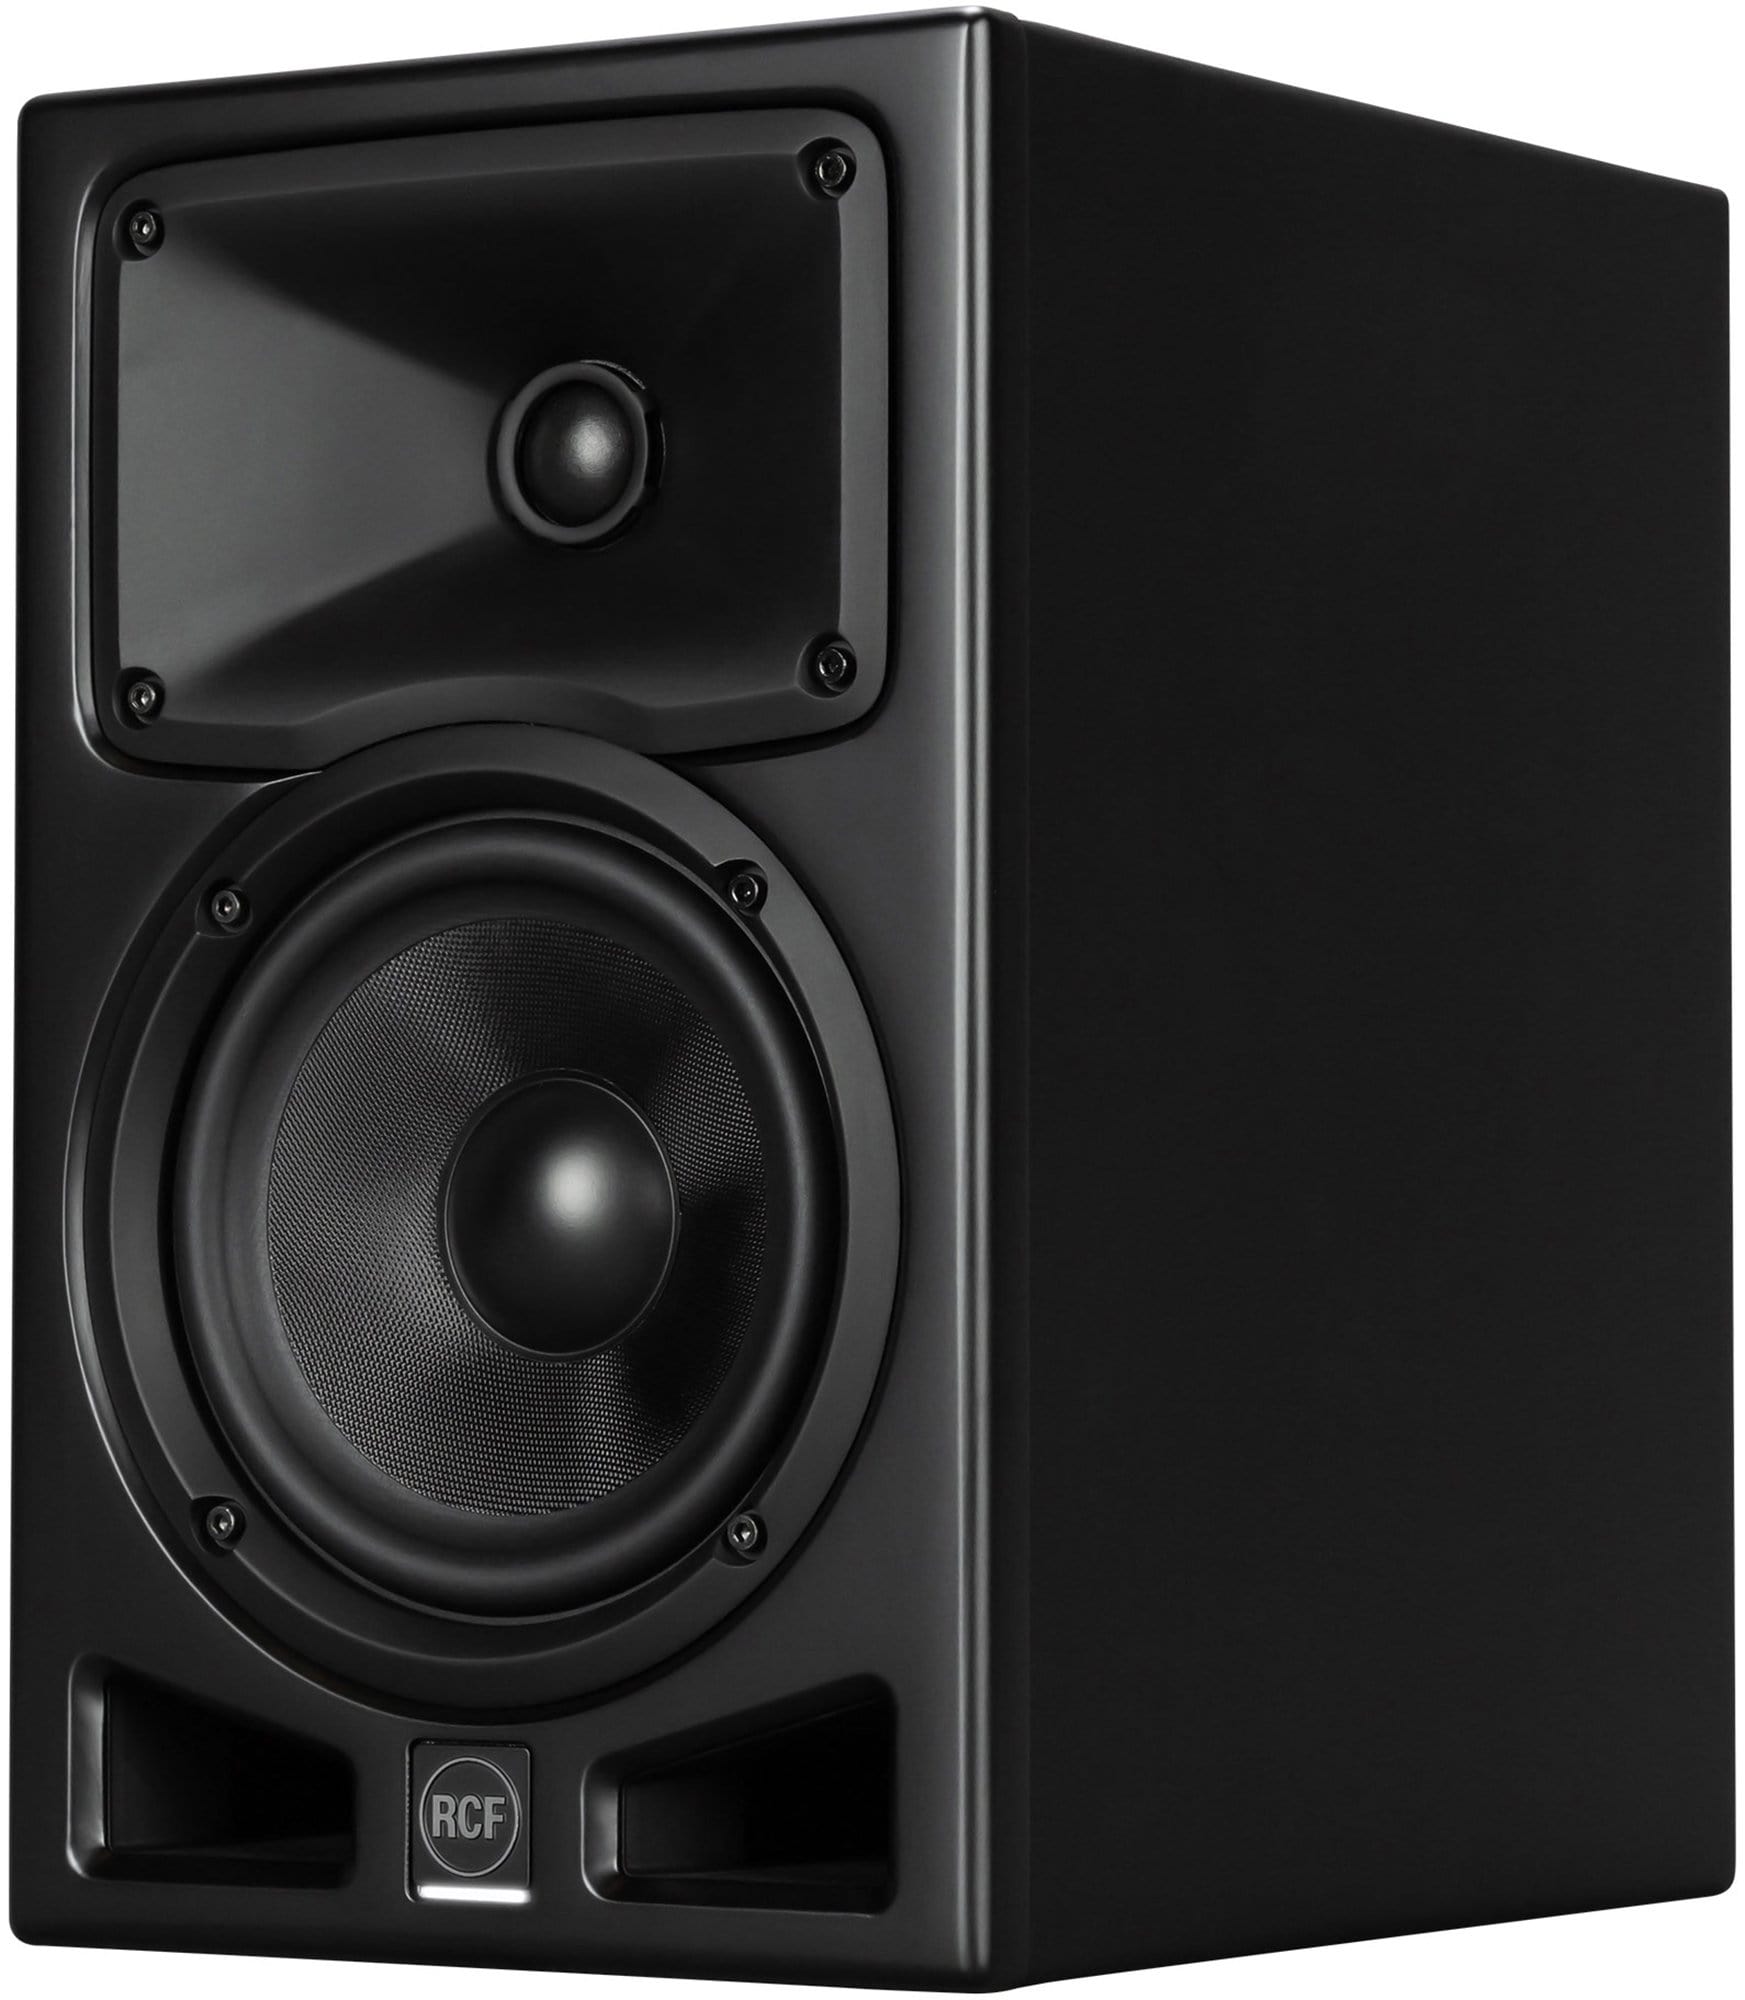 RCF AYRA PRO6 Active 6"" Studio Monitor - PSSL ProSound and Stage Lighting